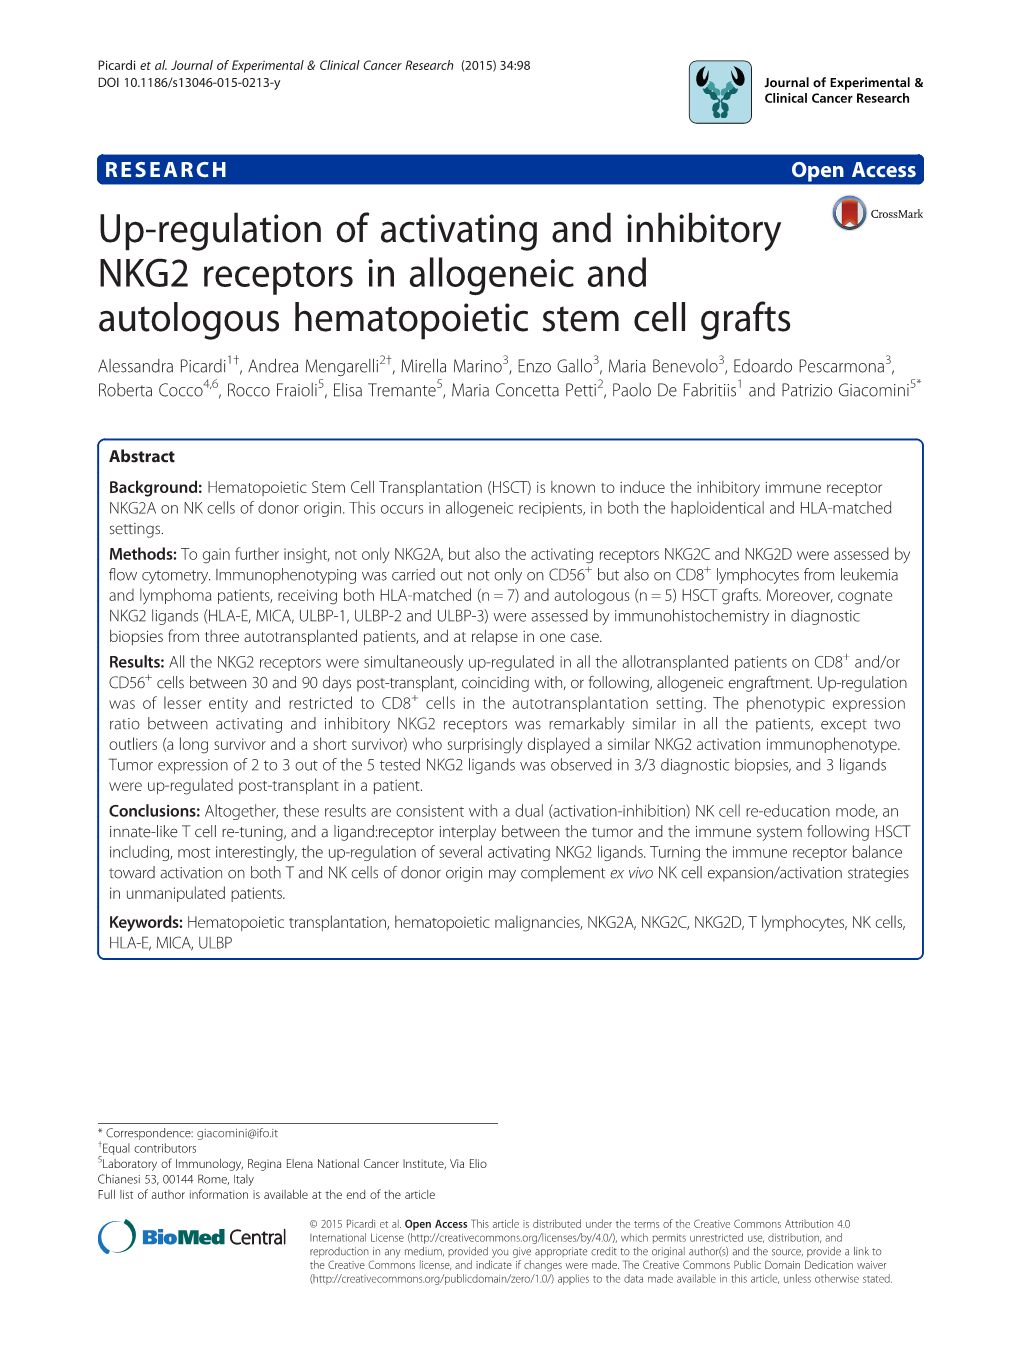 Up-Regulation of Activating and Inhibitory NKG2 Receptors In